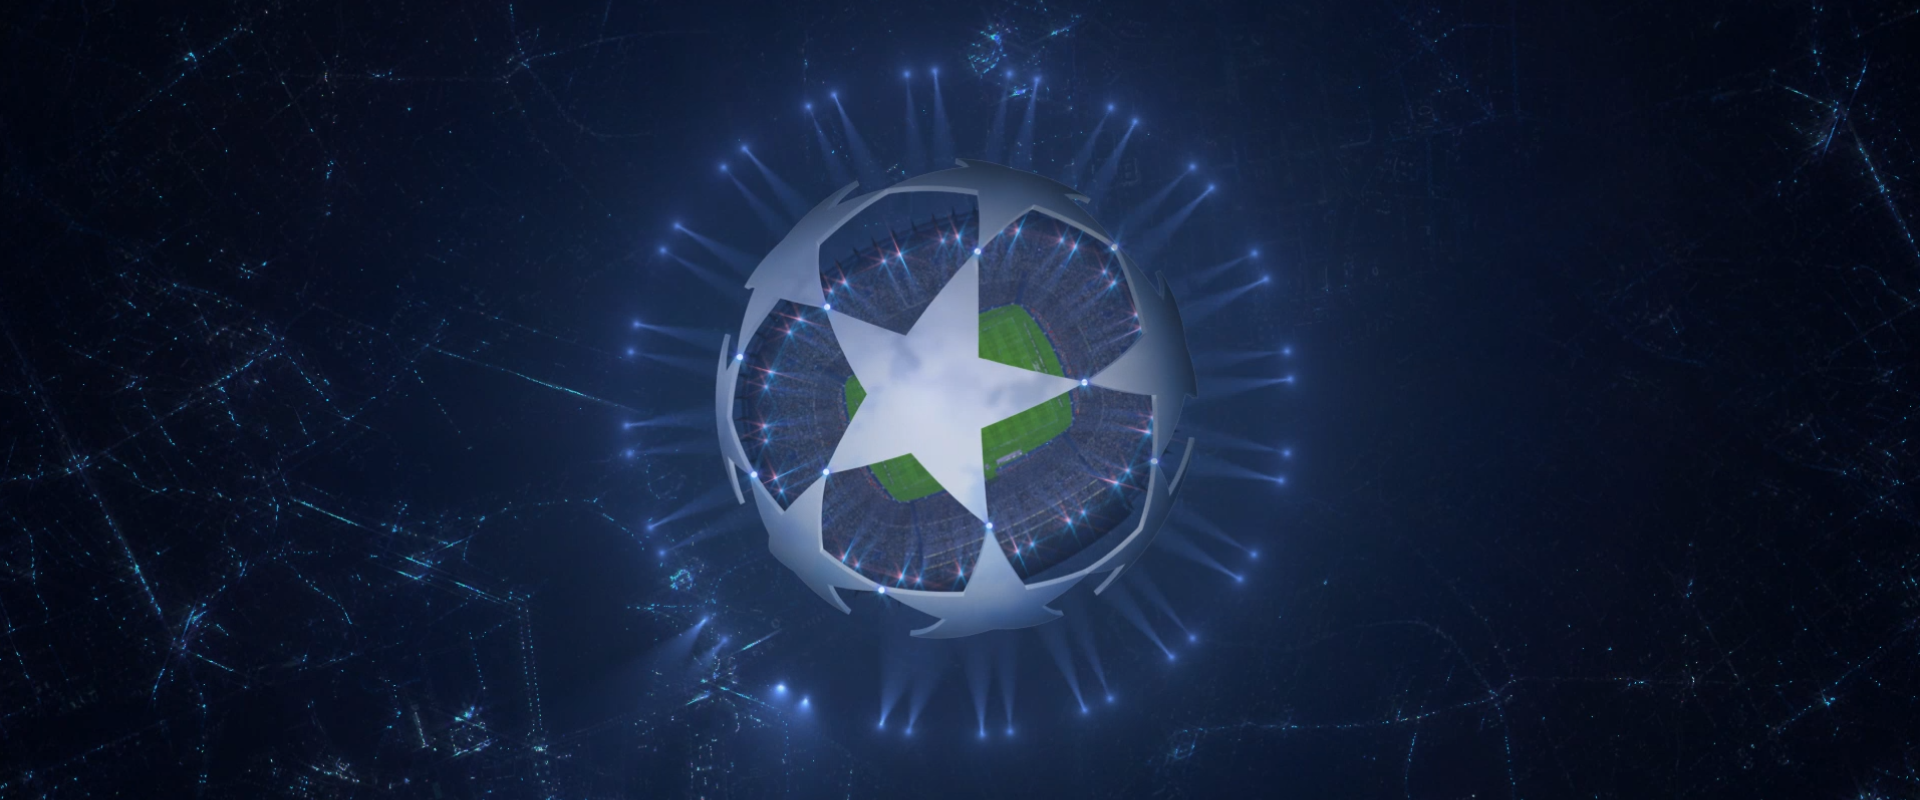 VR Live Experience with the UEFA Champions League